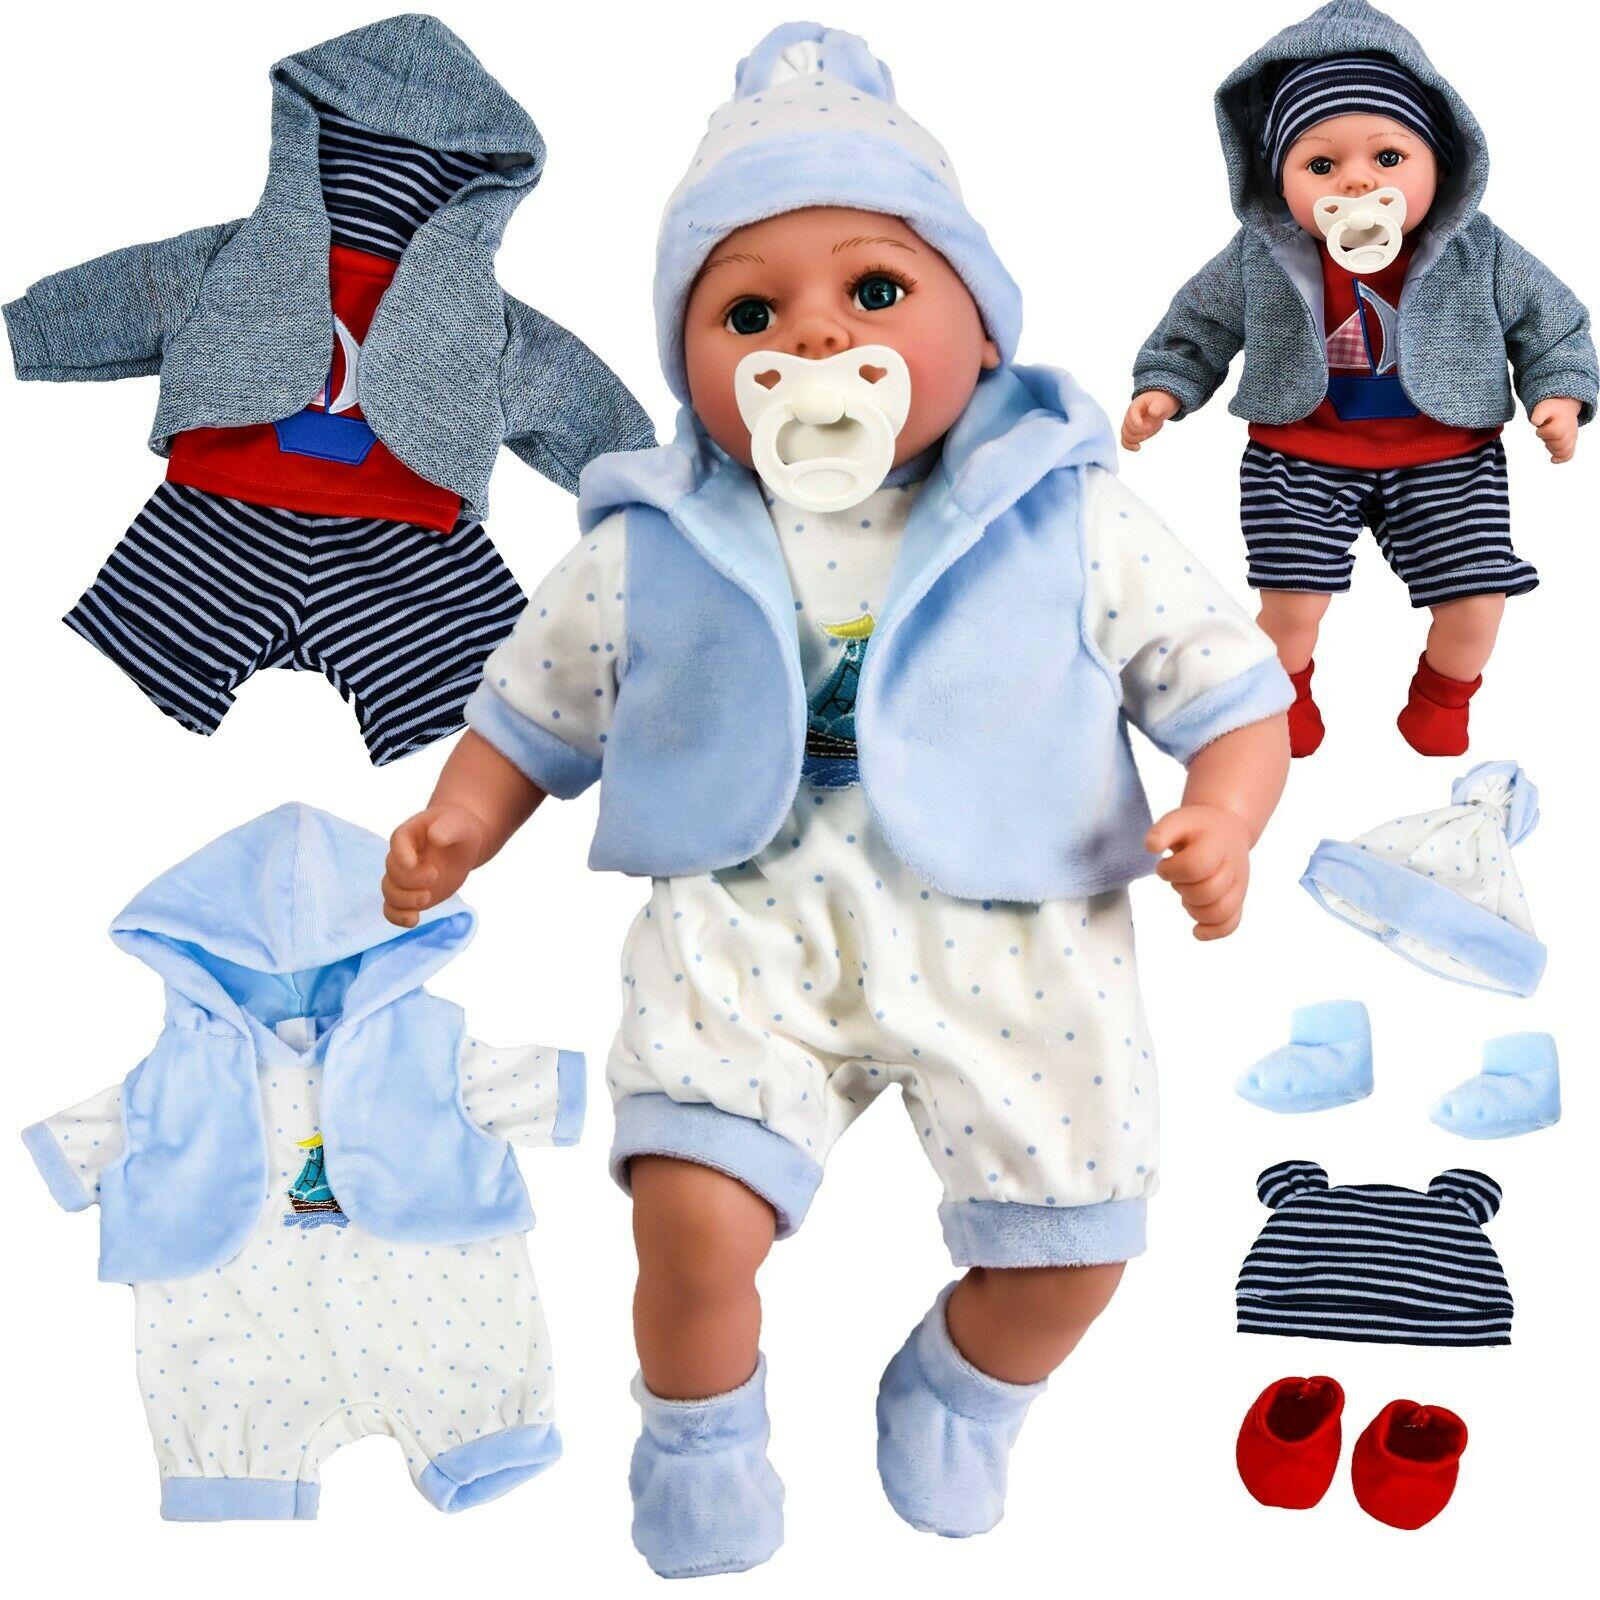 18" Baby Boy Doll Clothes Set Of Two by BiBi Doll - The Magic Toy Shop